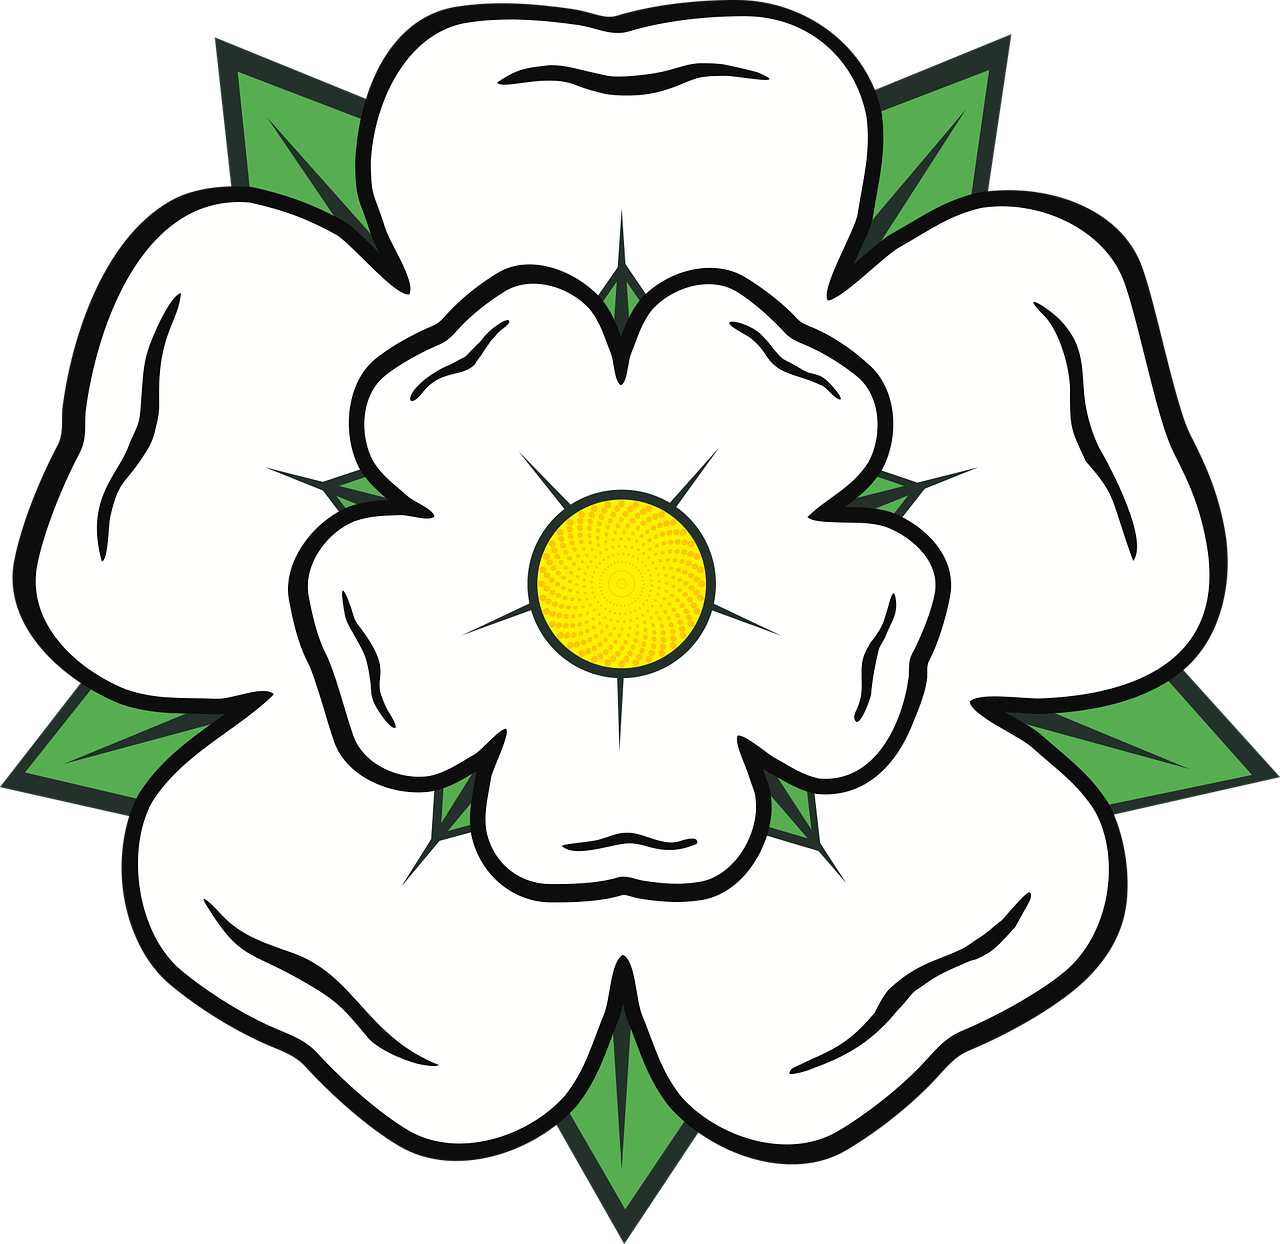 yorkshire rose county england